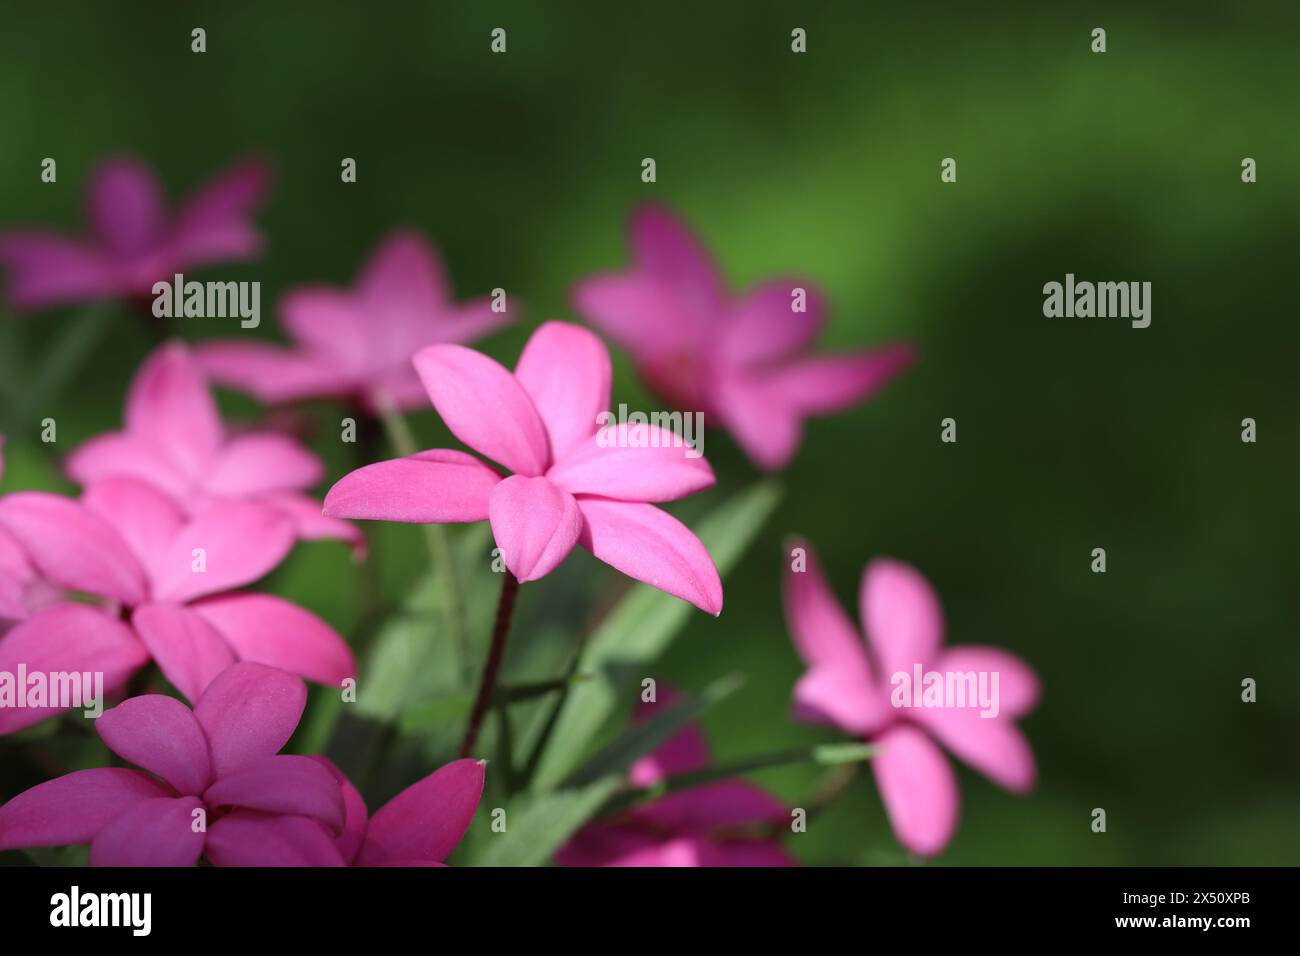 Close-up view of pink sunlit rhodohypoxis flowers with selective focus against dark green shady and blurred background, copy space Stock Photo